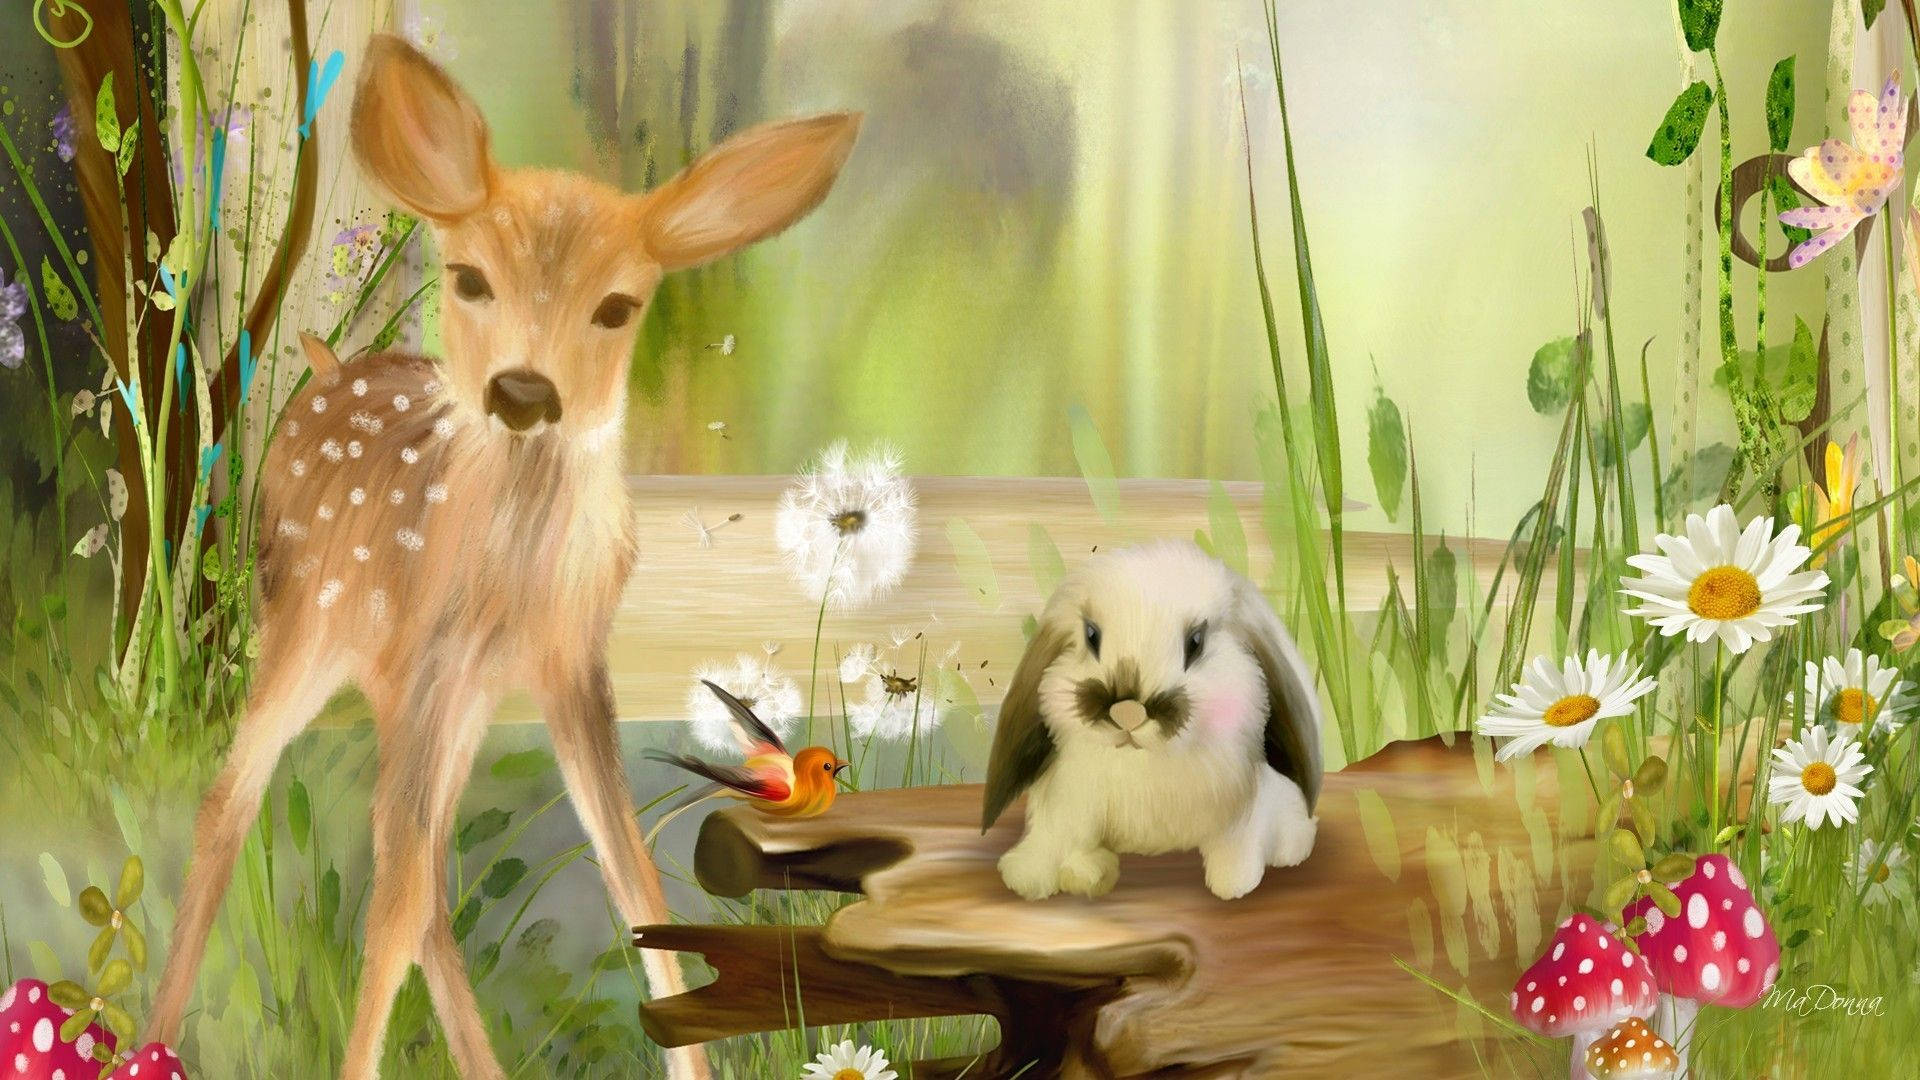 Fawn and Bunny spending time together Wallpaper